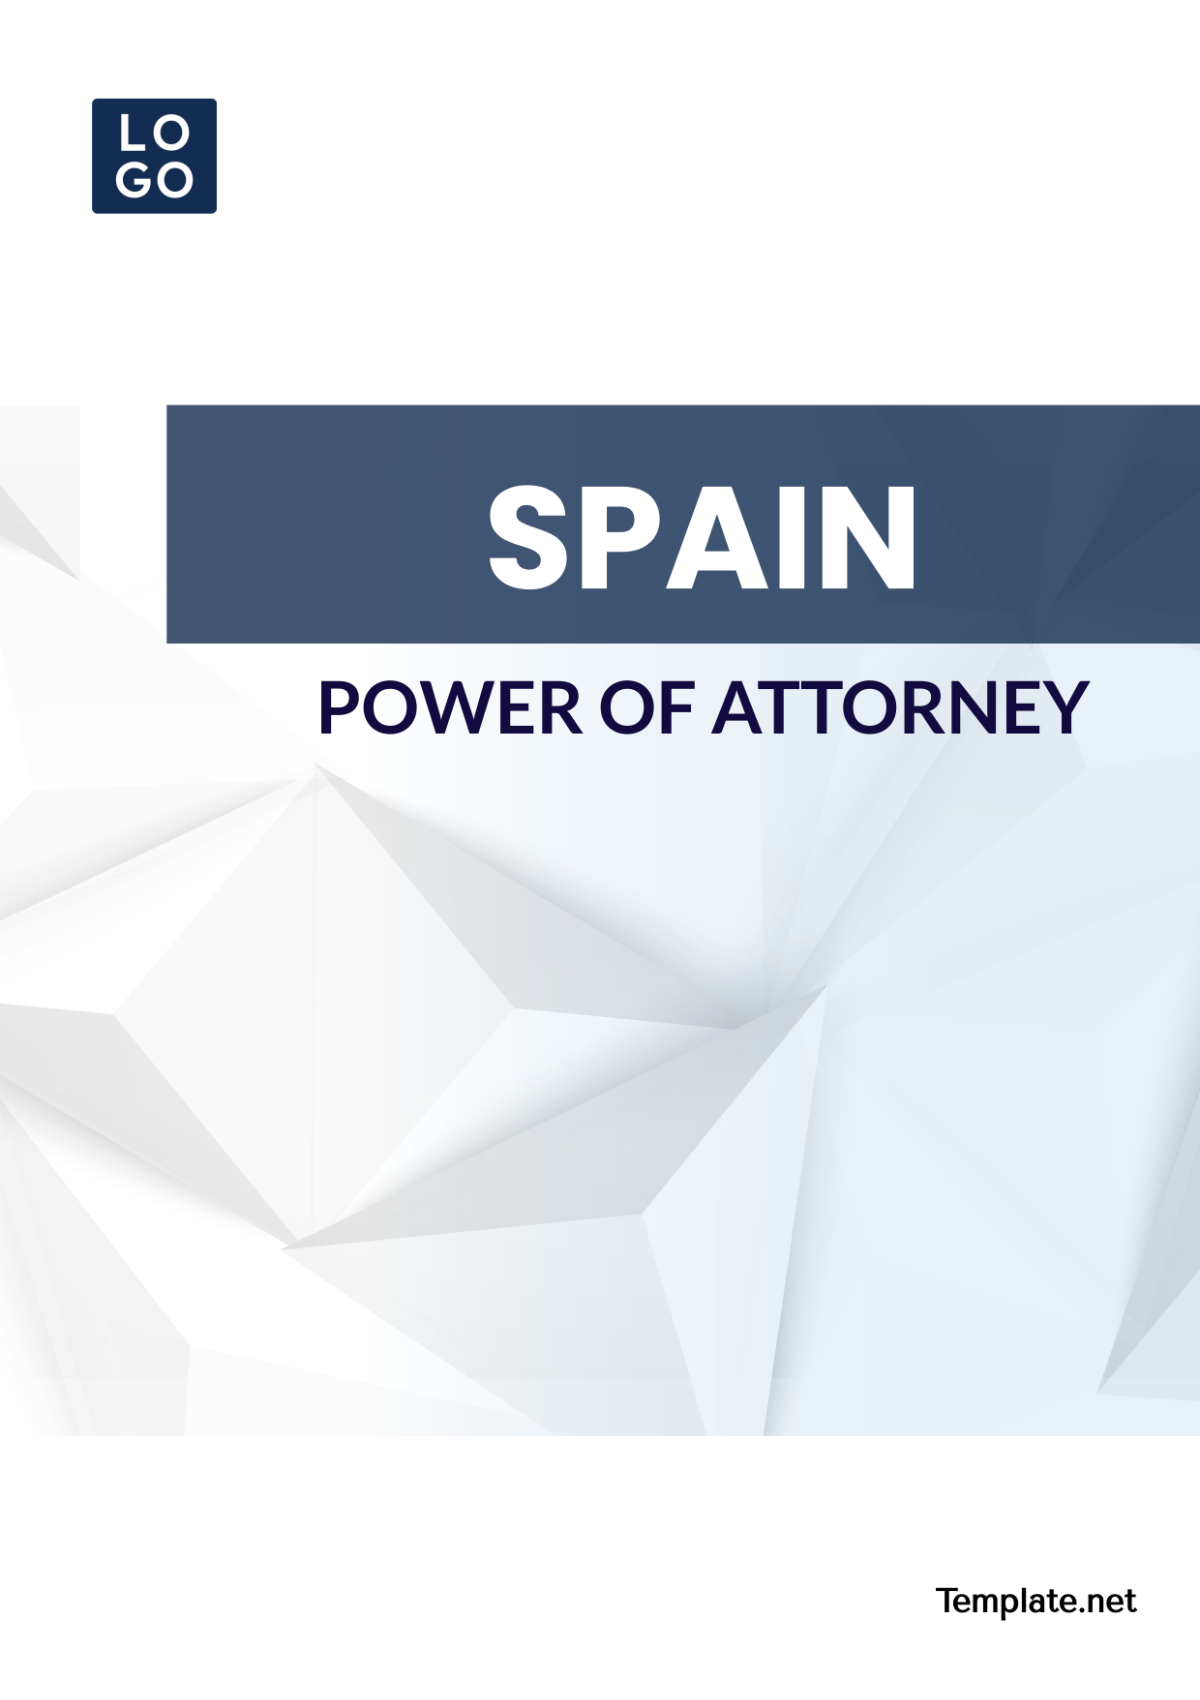 Spain Power of Attorney Template